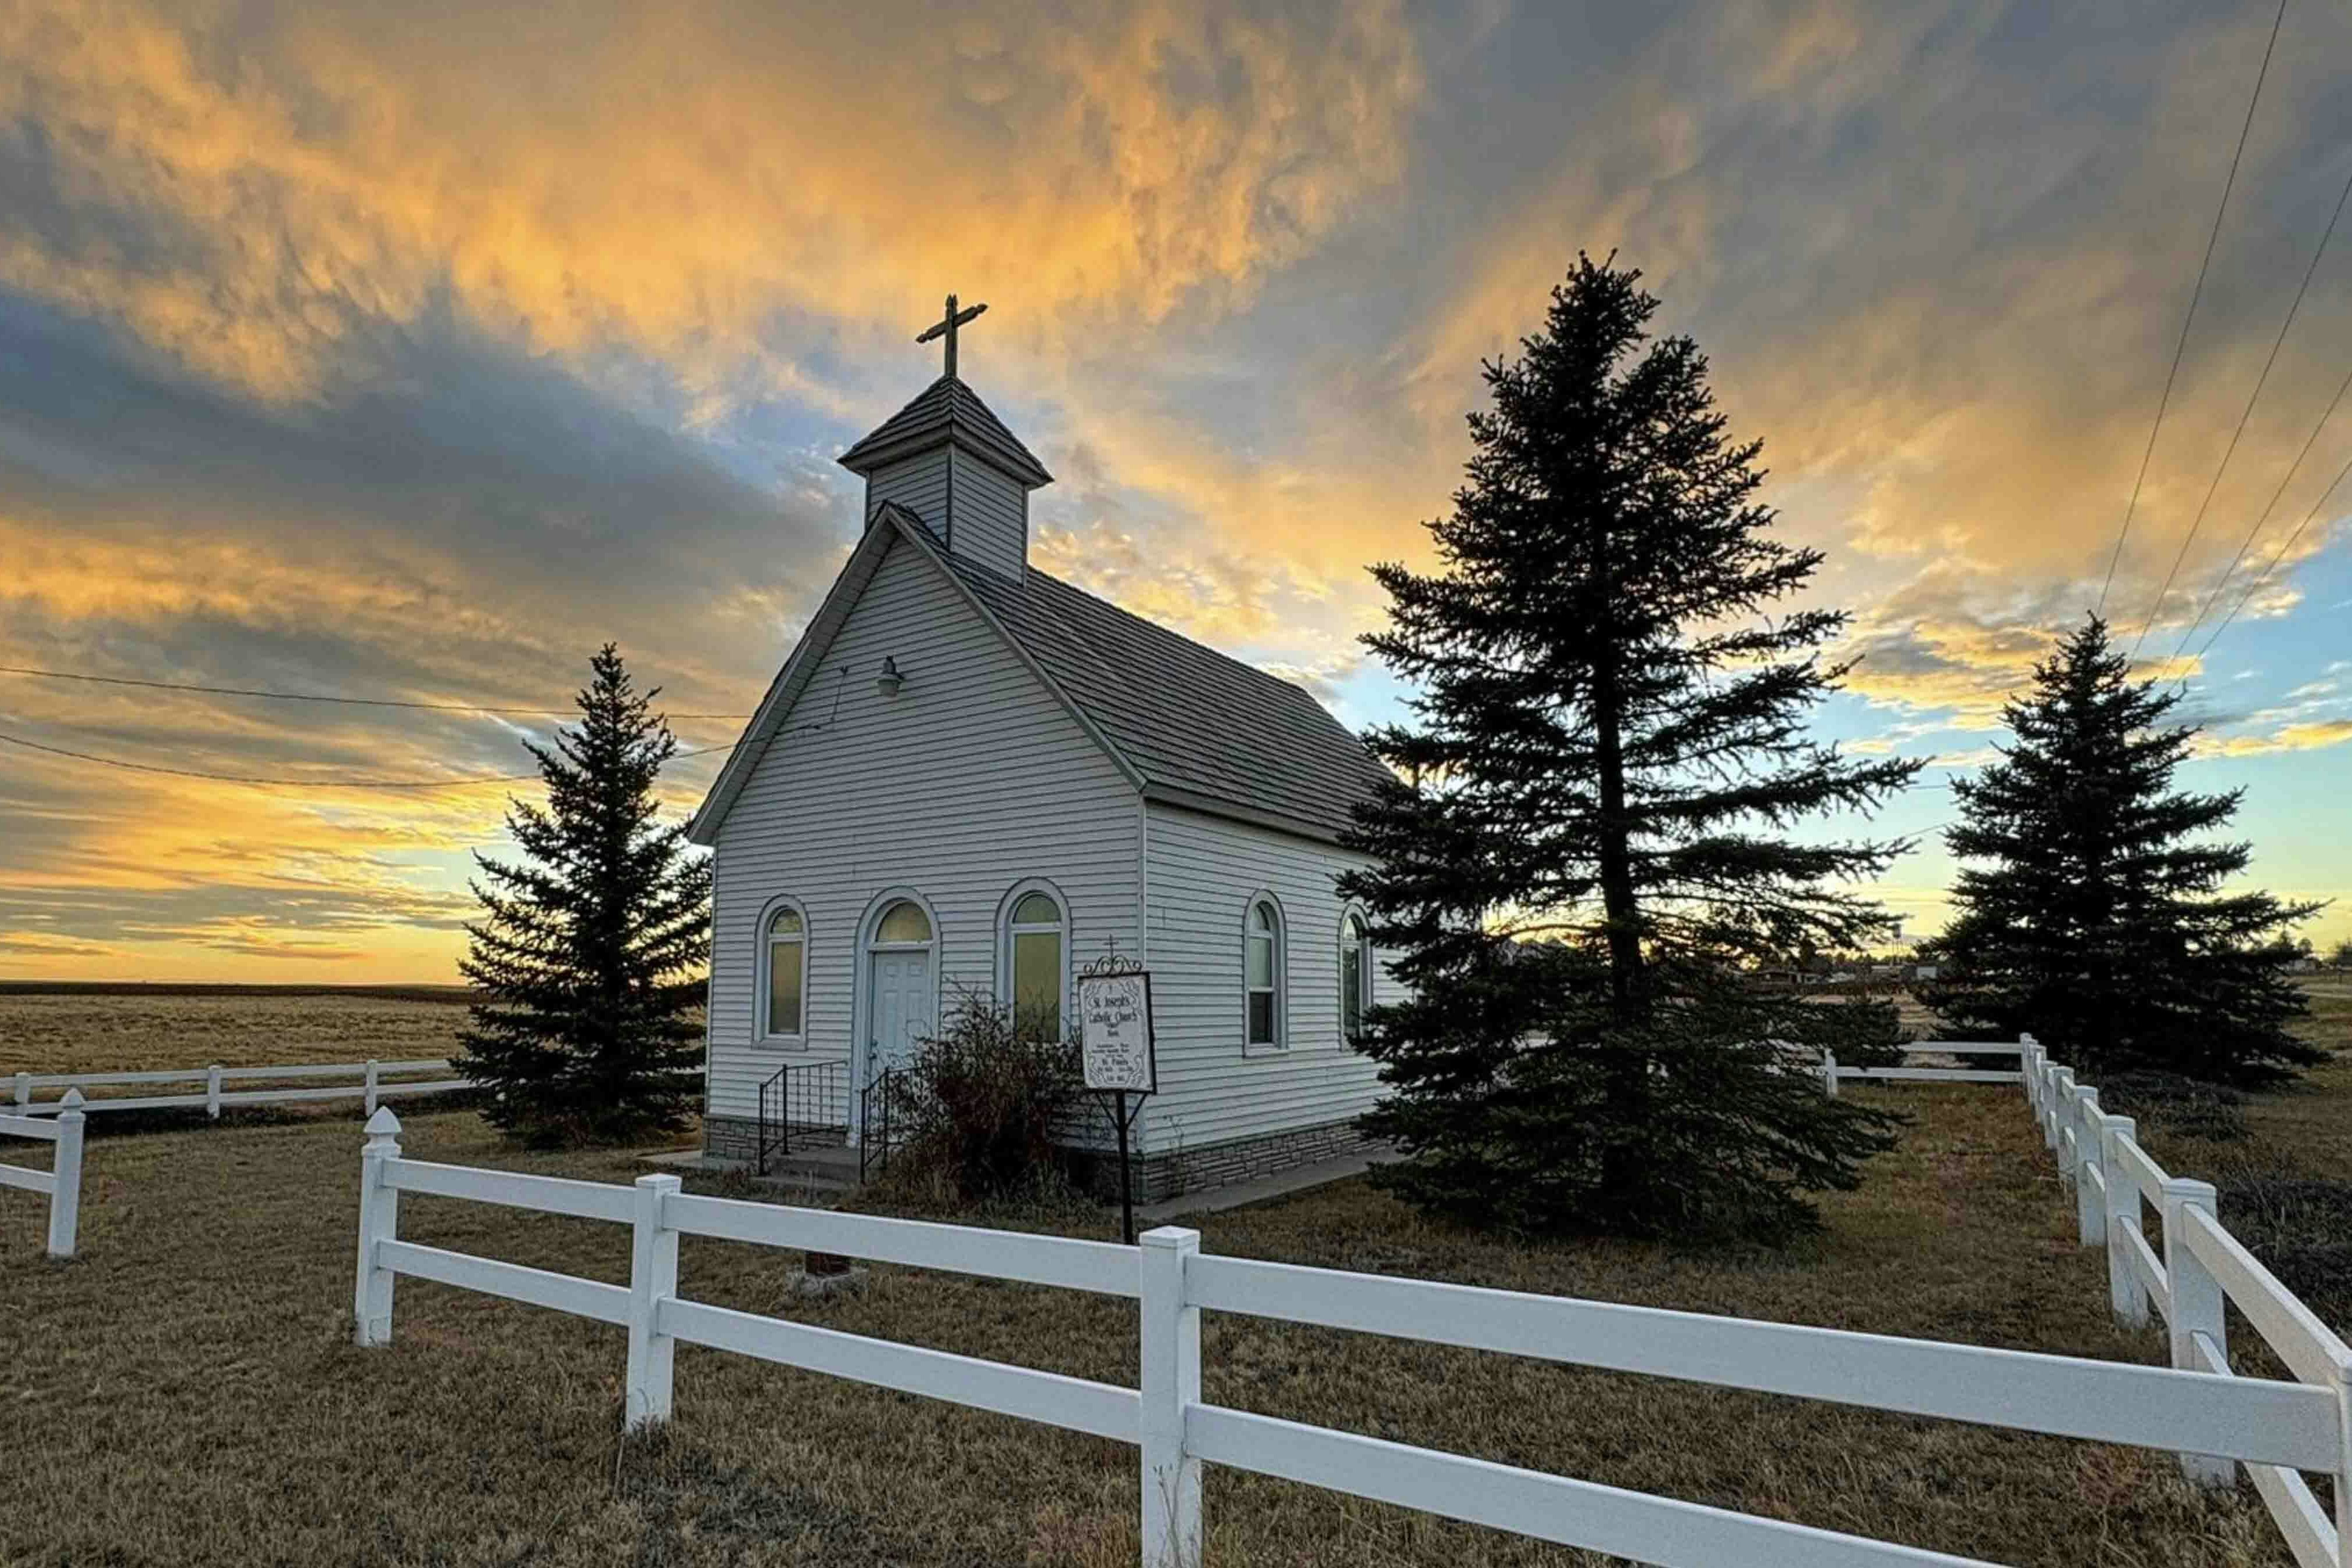 "A tranquil sunset at this Albin, Wyoming church."